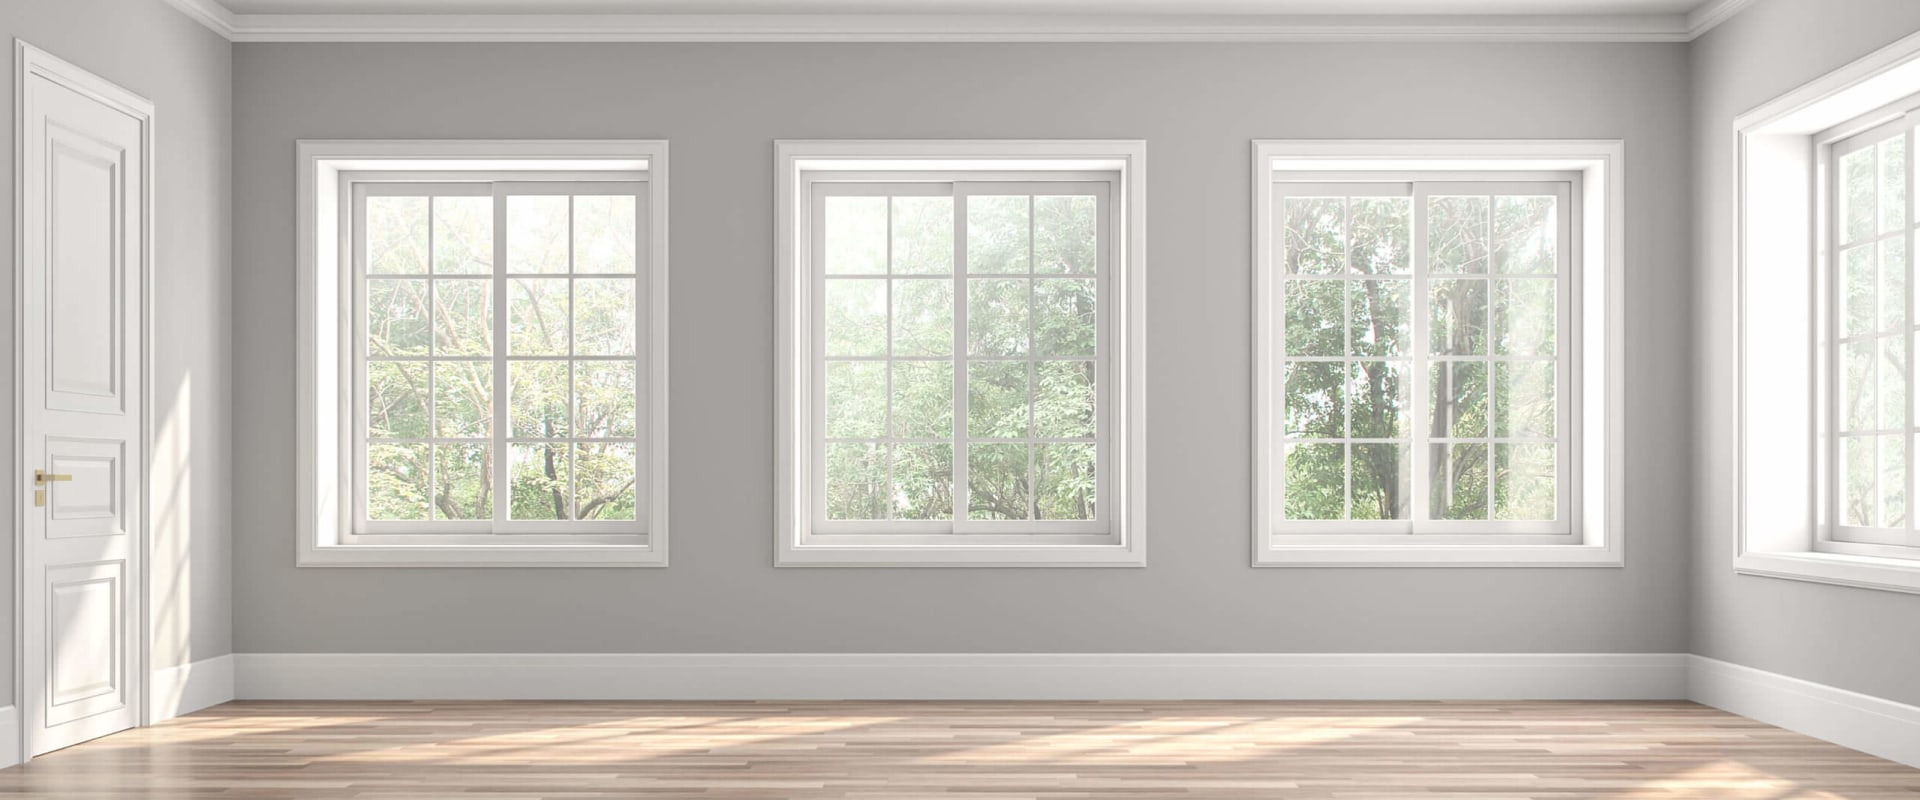 Where to Buy Replacement Windows for DIY Homeowners